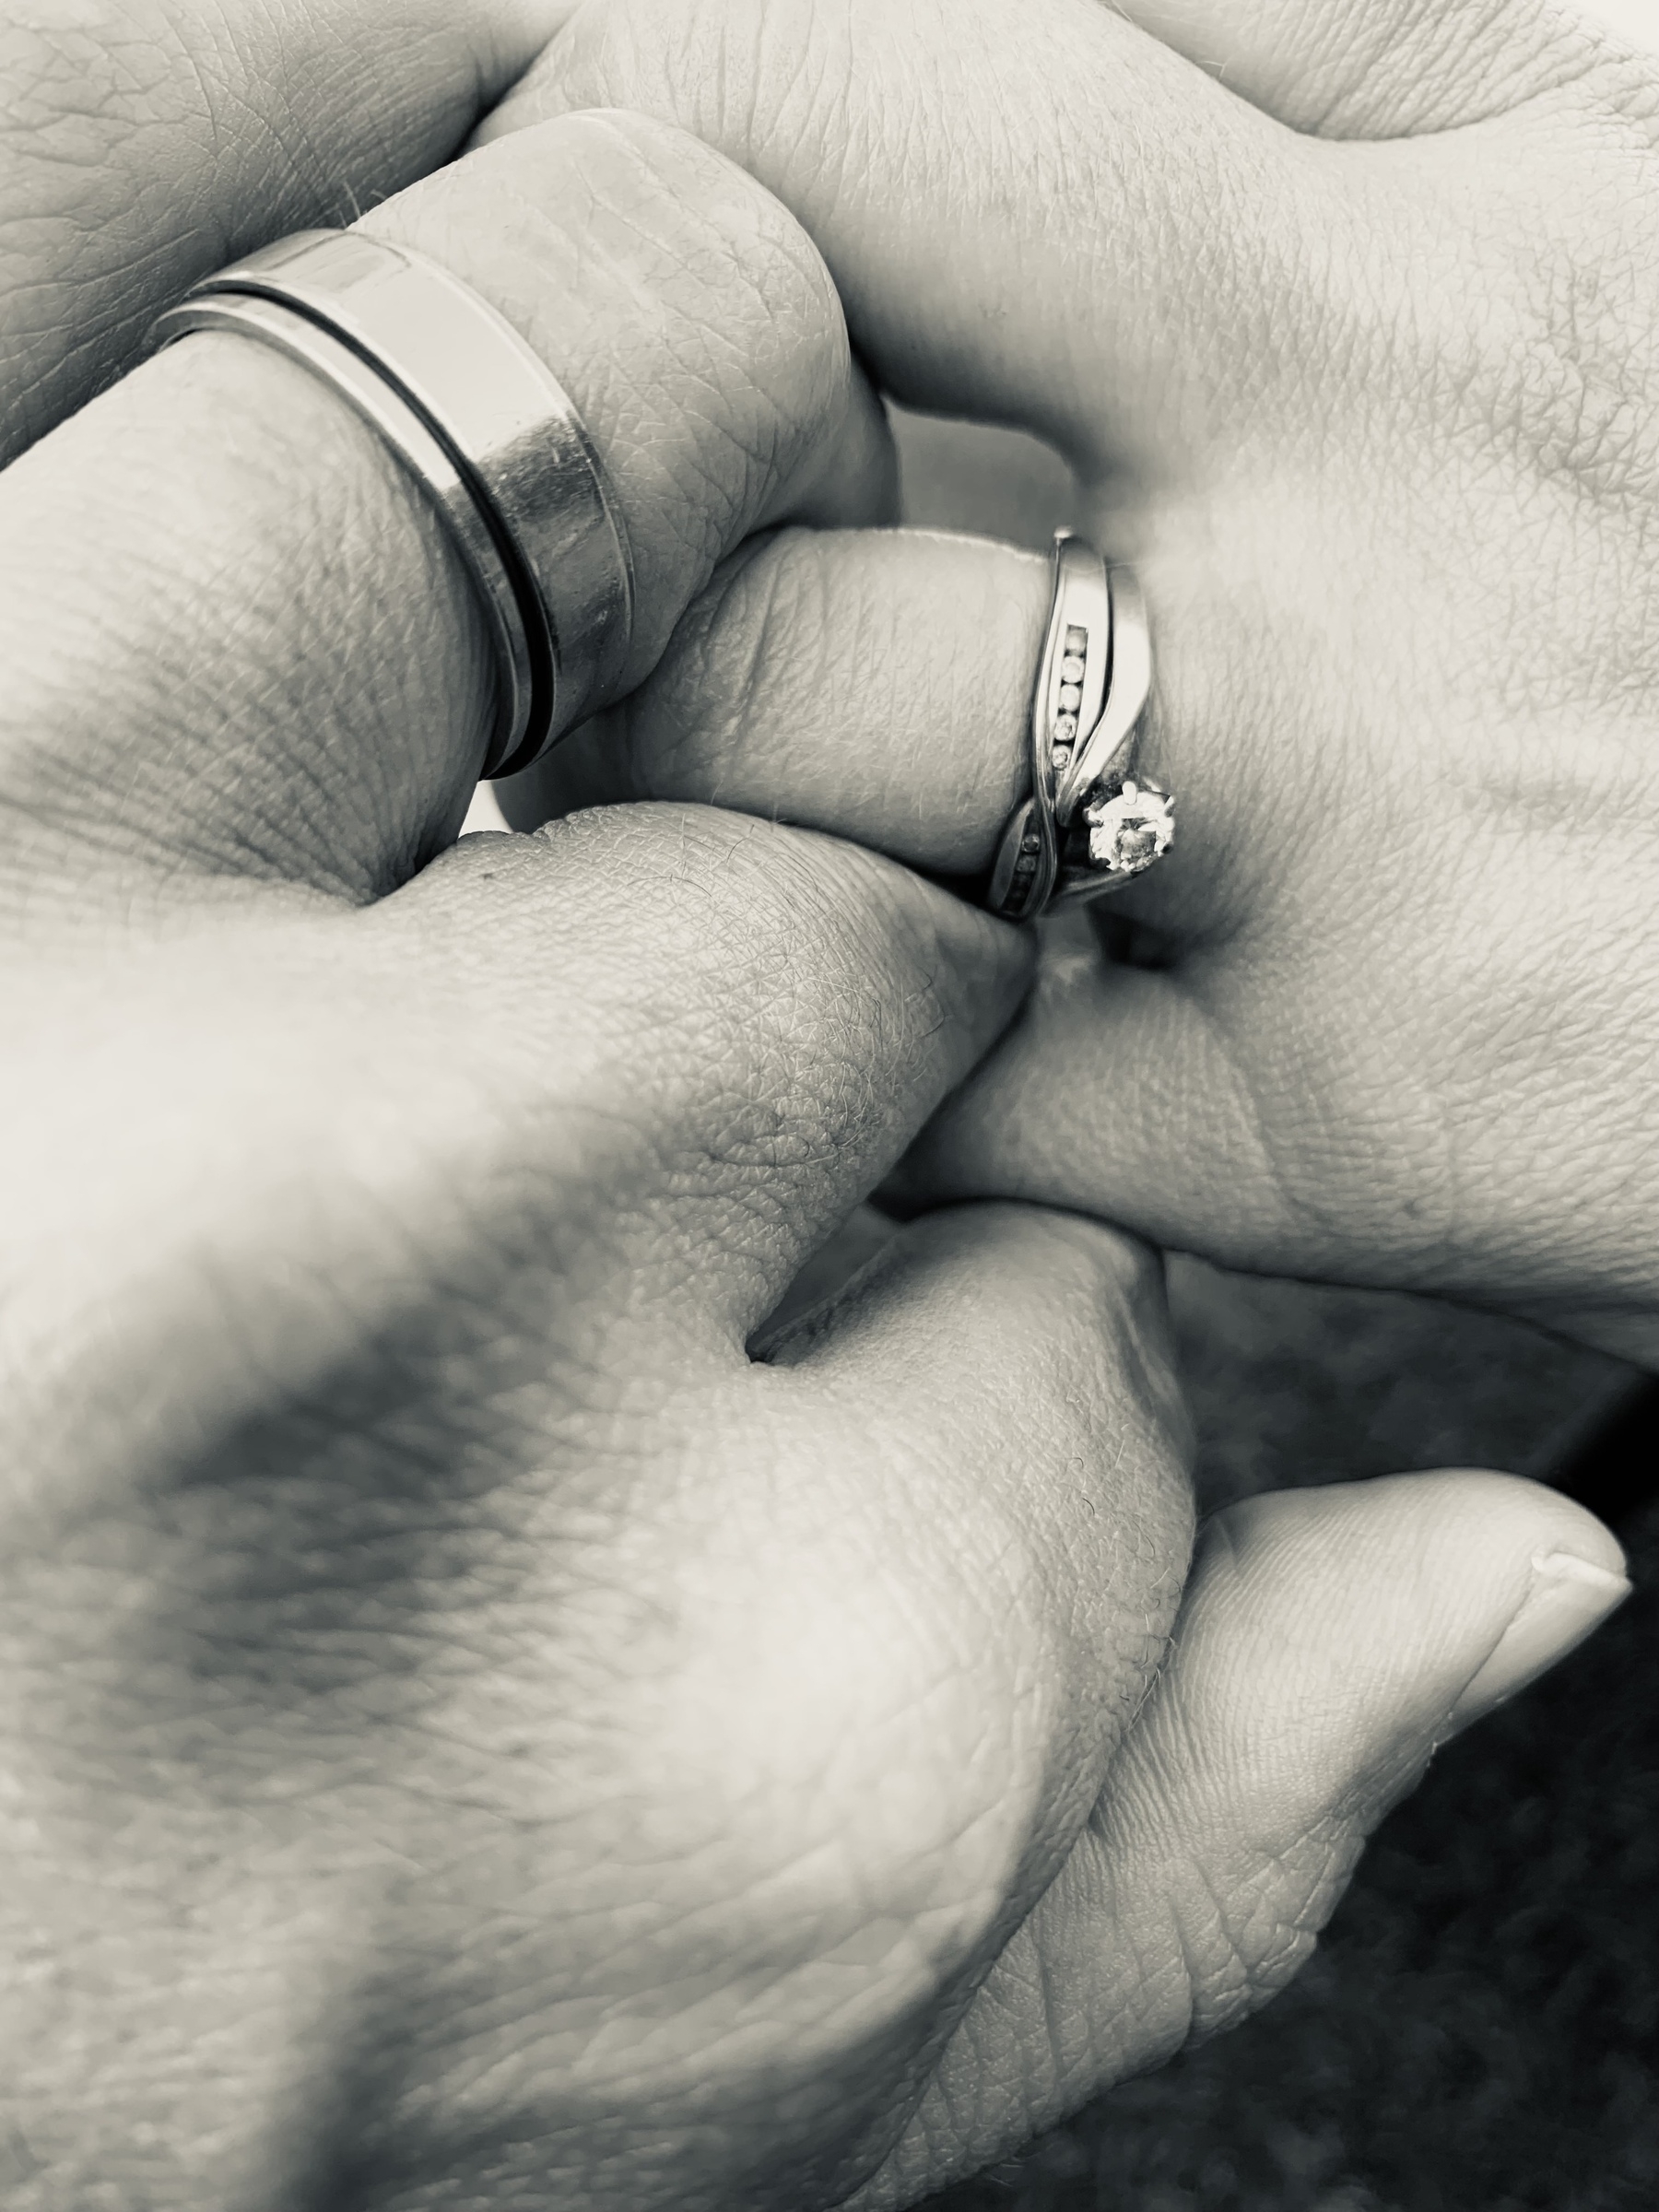 Black and white photo of two intertwined hands with rings on the ring fingers